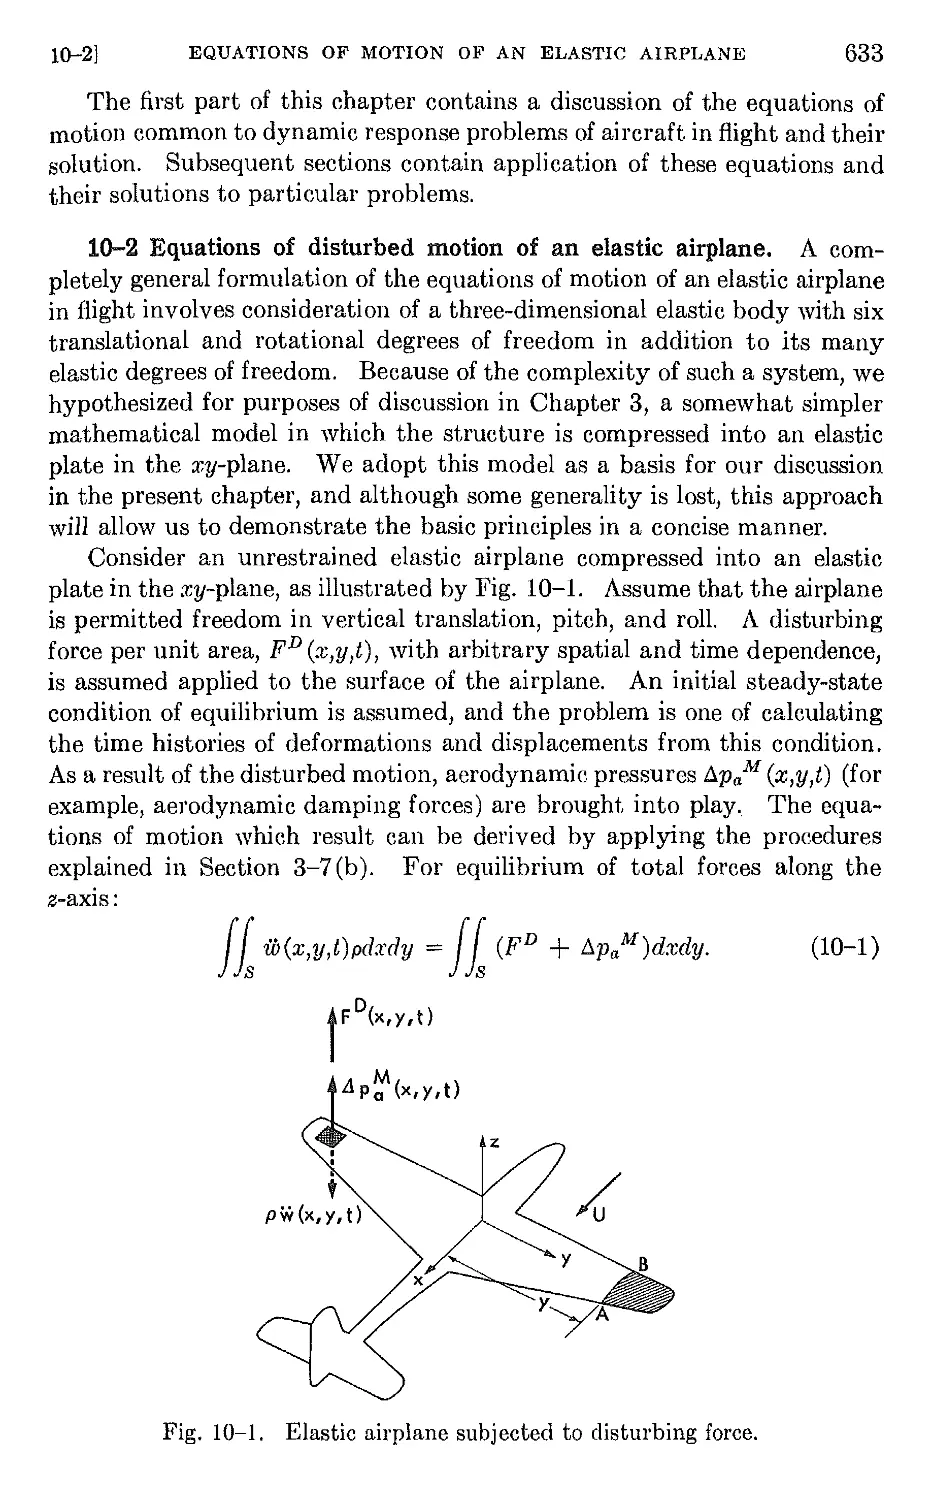 10.2 Equations of disturbed motion of an elastic airplane